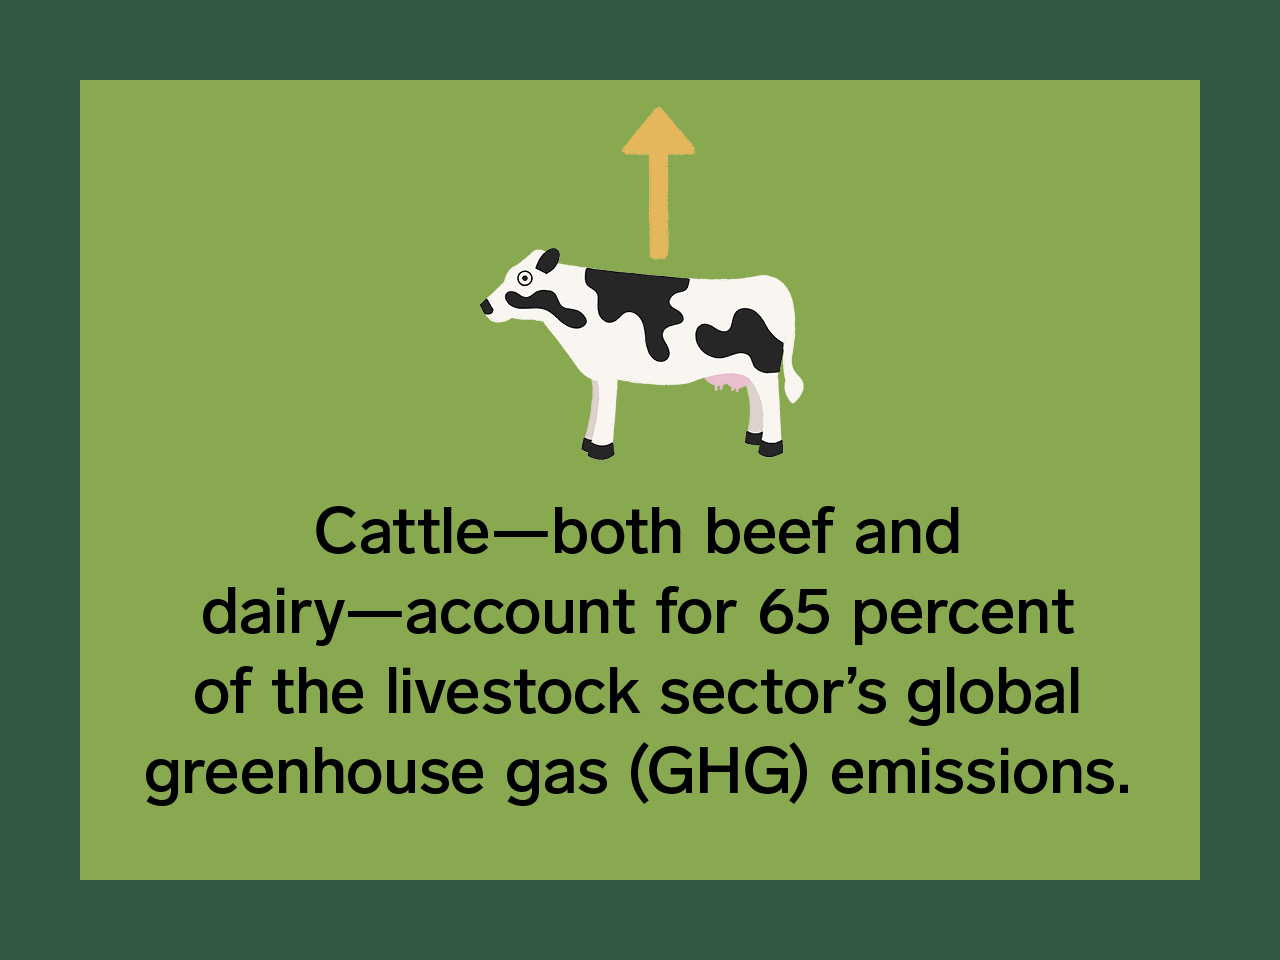 Green graphic with text and an illustration of a cow.